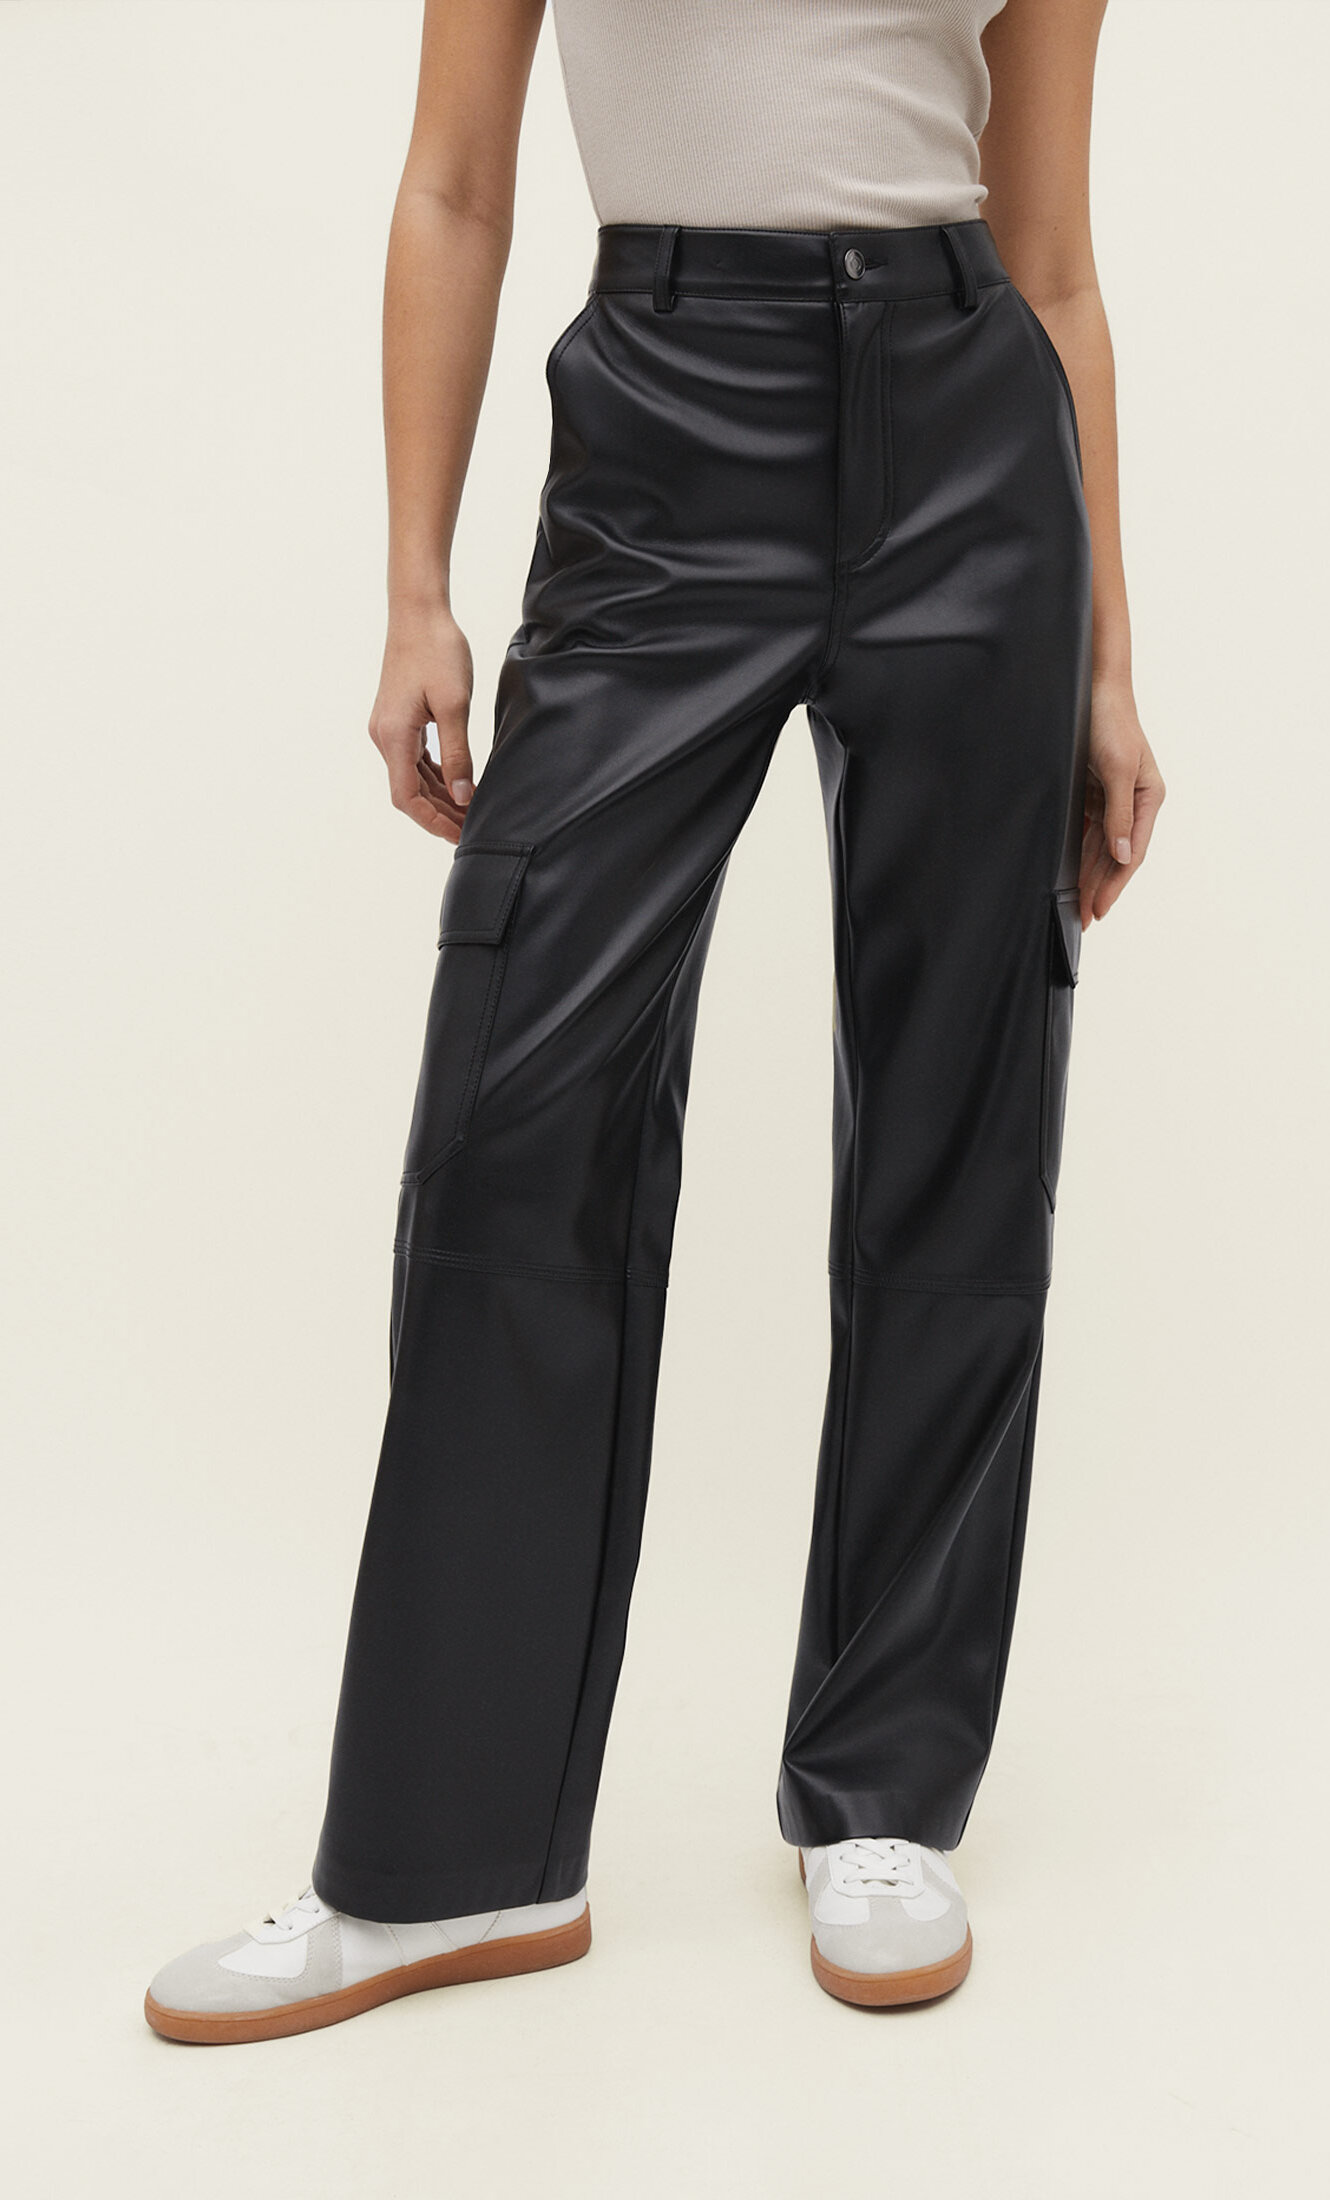 Leather Cargo Pants and Leather Pants Online Shop  Self Cntrd   selfcntrdin